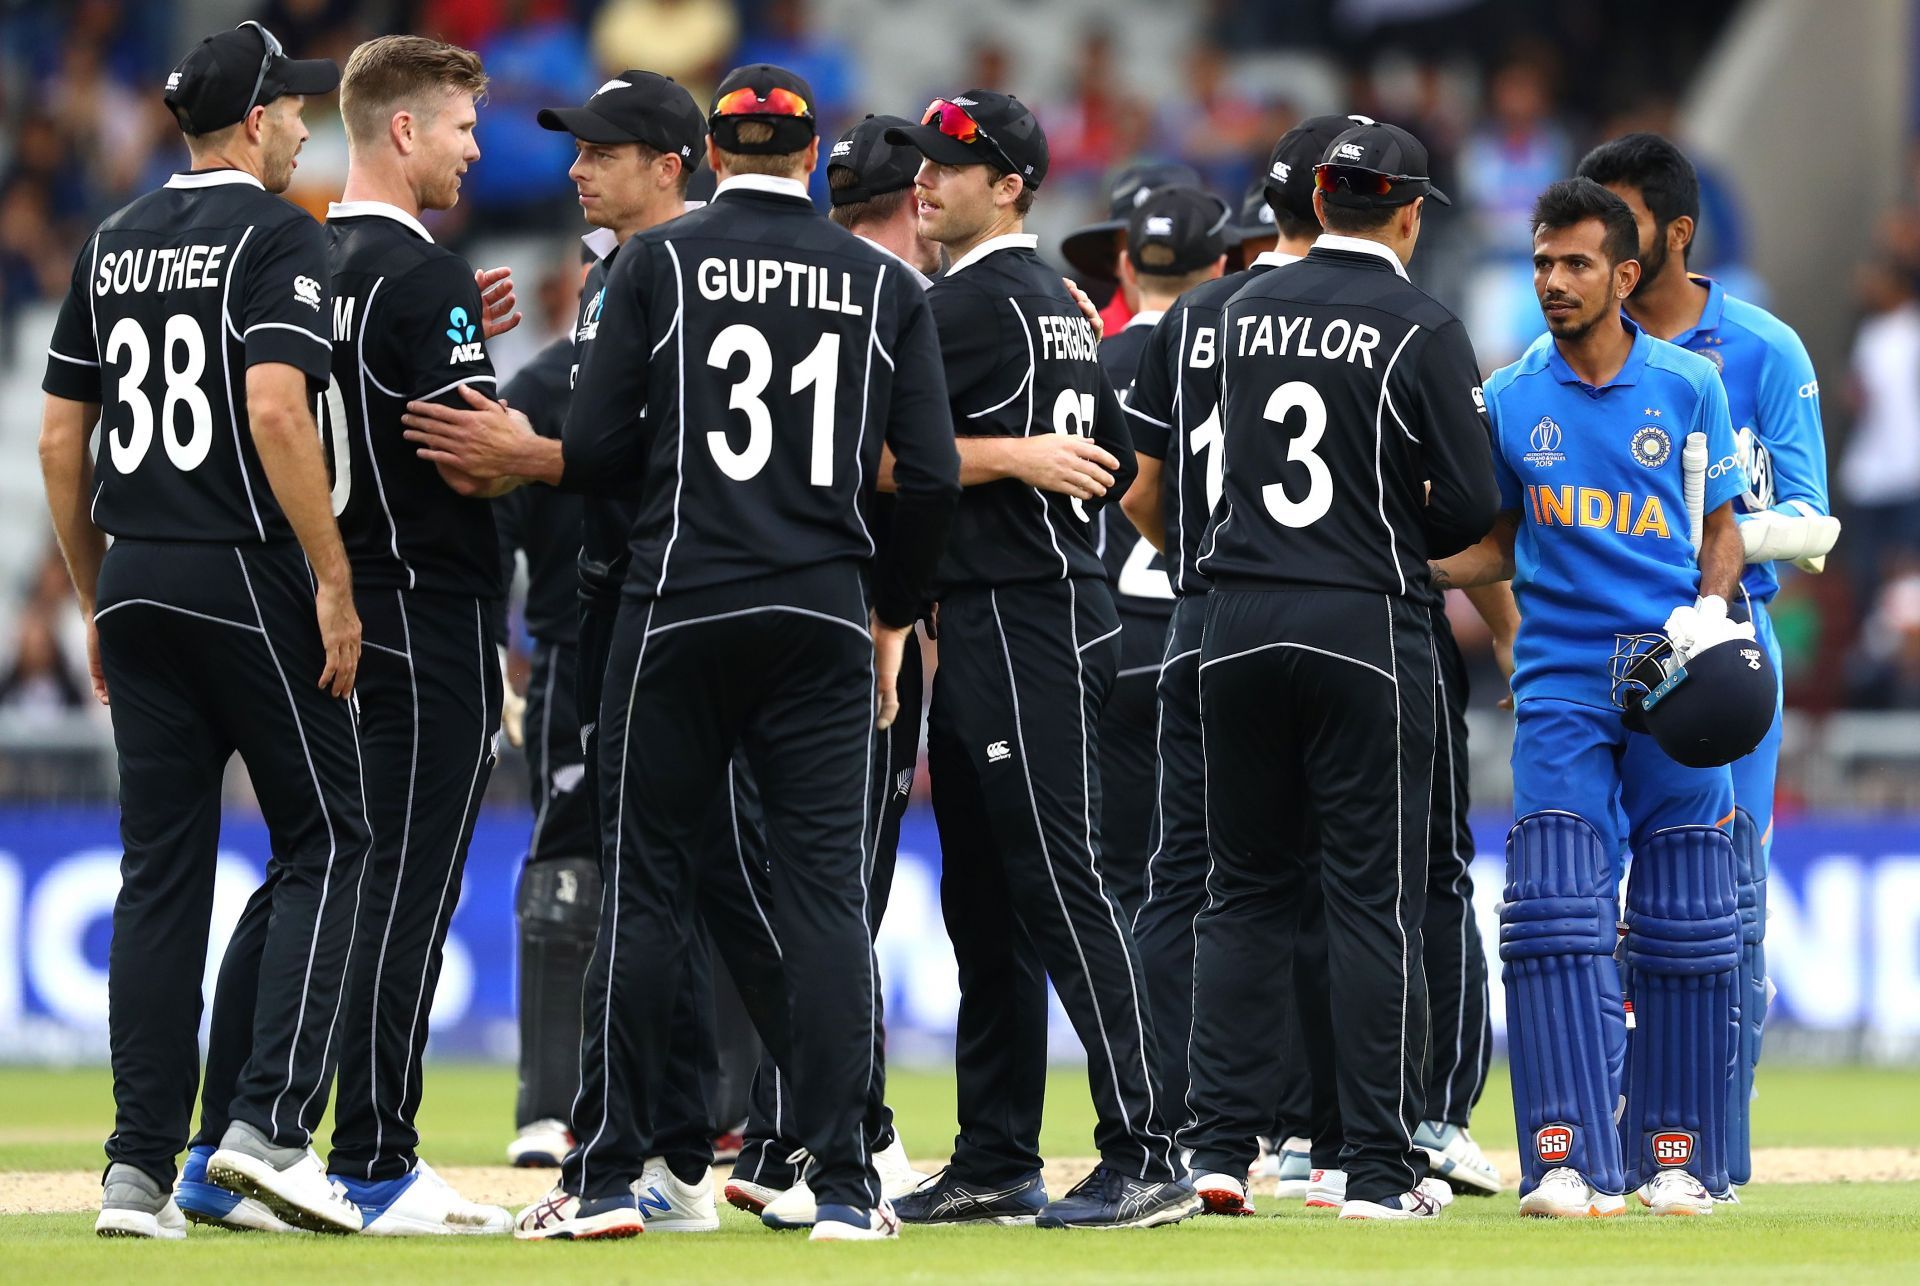 New Zealand ousted India in the 2019 World Cup